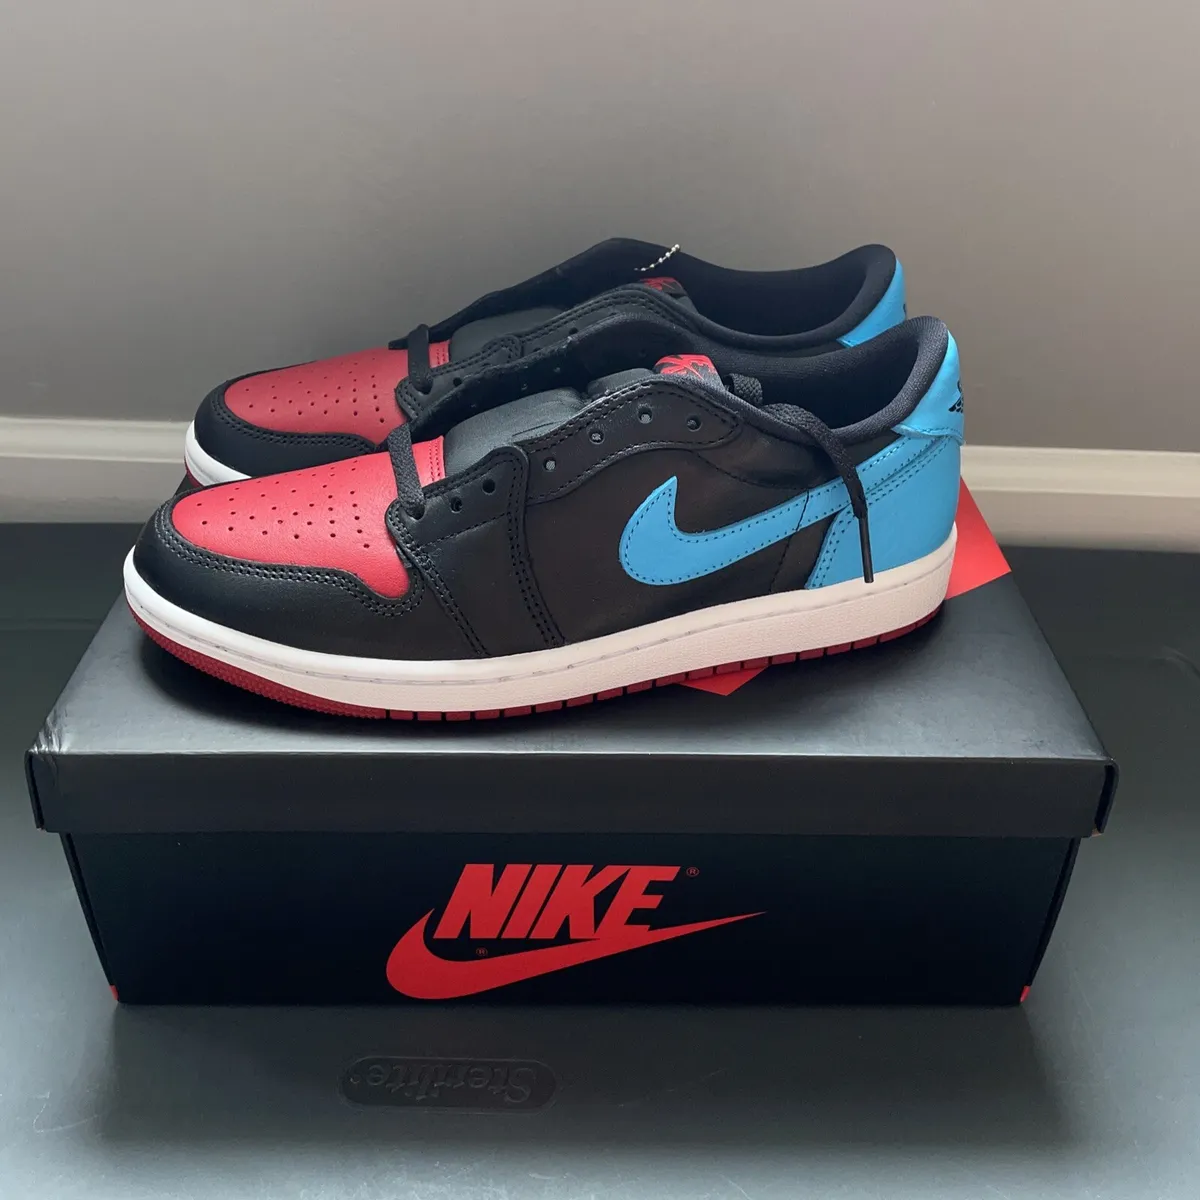 BRAND NEW WITH BOX - Jordan 1 Retro Low OG NC to CHI - Size W8 M6